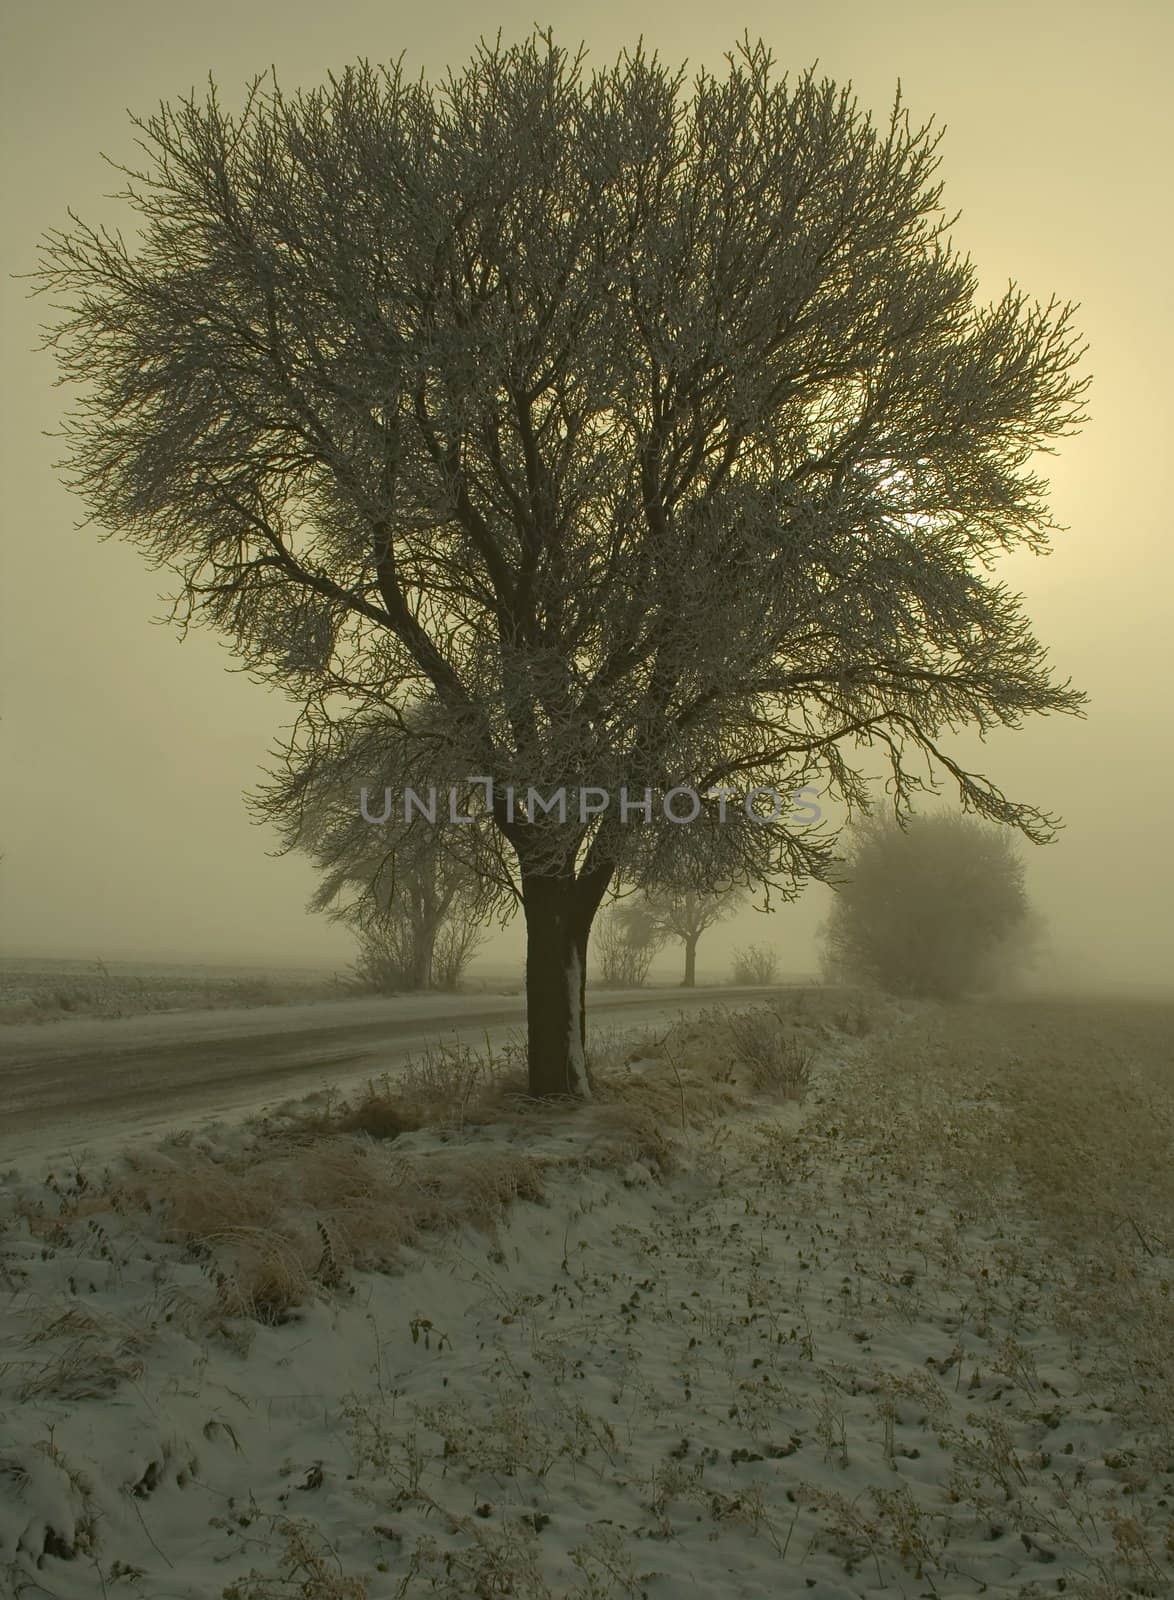 winter scenery with a tree by road covered with hoarfrost